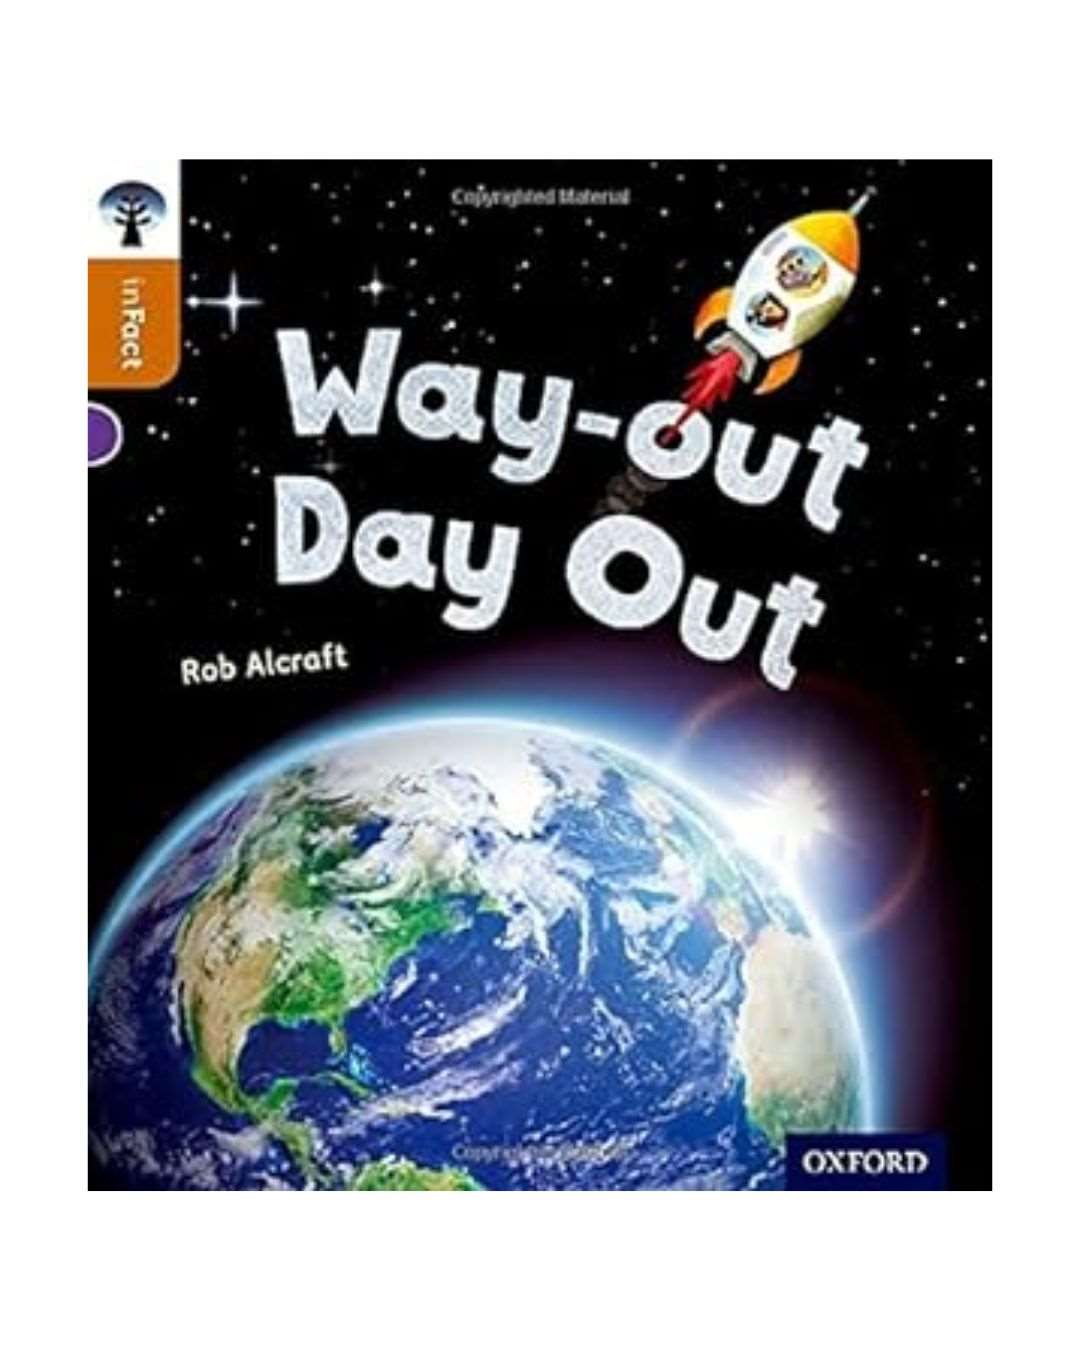 Improve Your Child's Vocabulary - Way-Out Day Out - Original